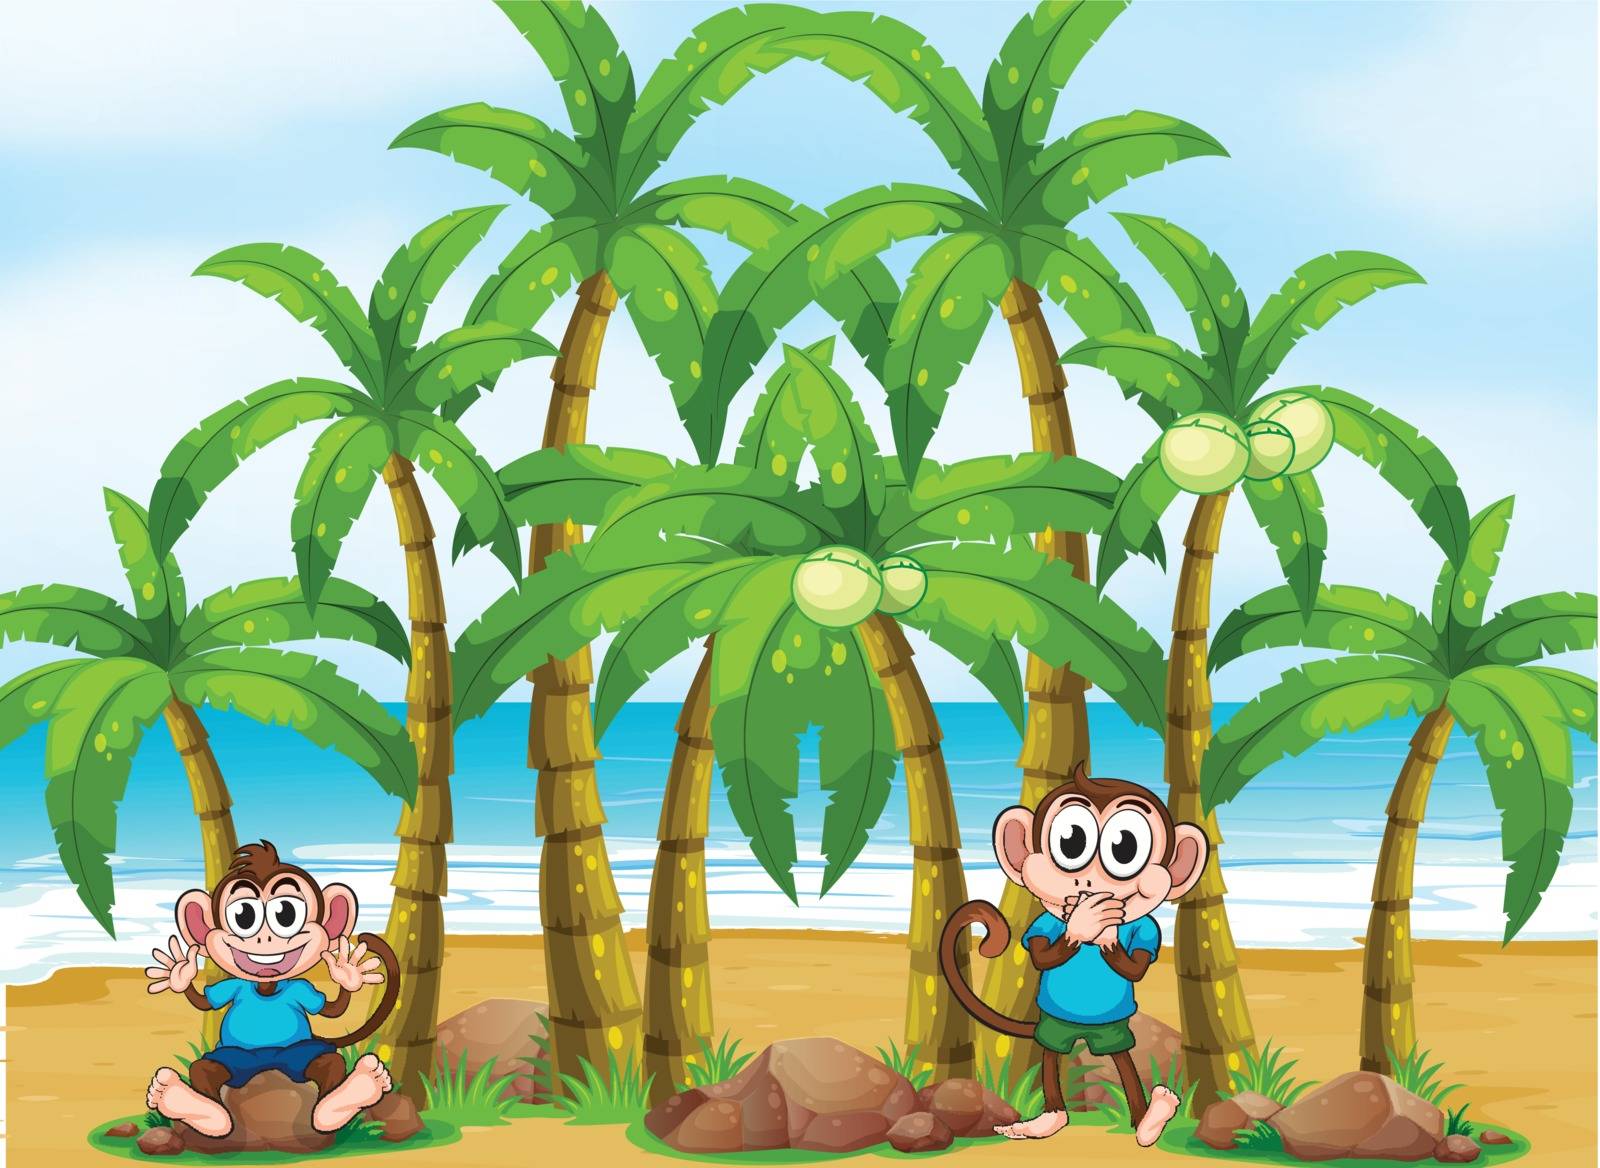 Illustration of a beach with tall coconut trees and playful monkeys